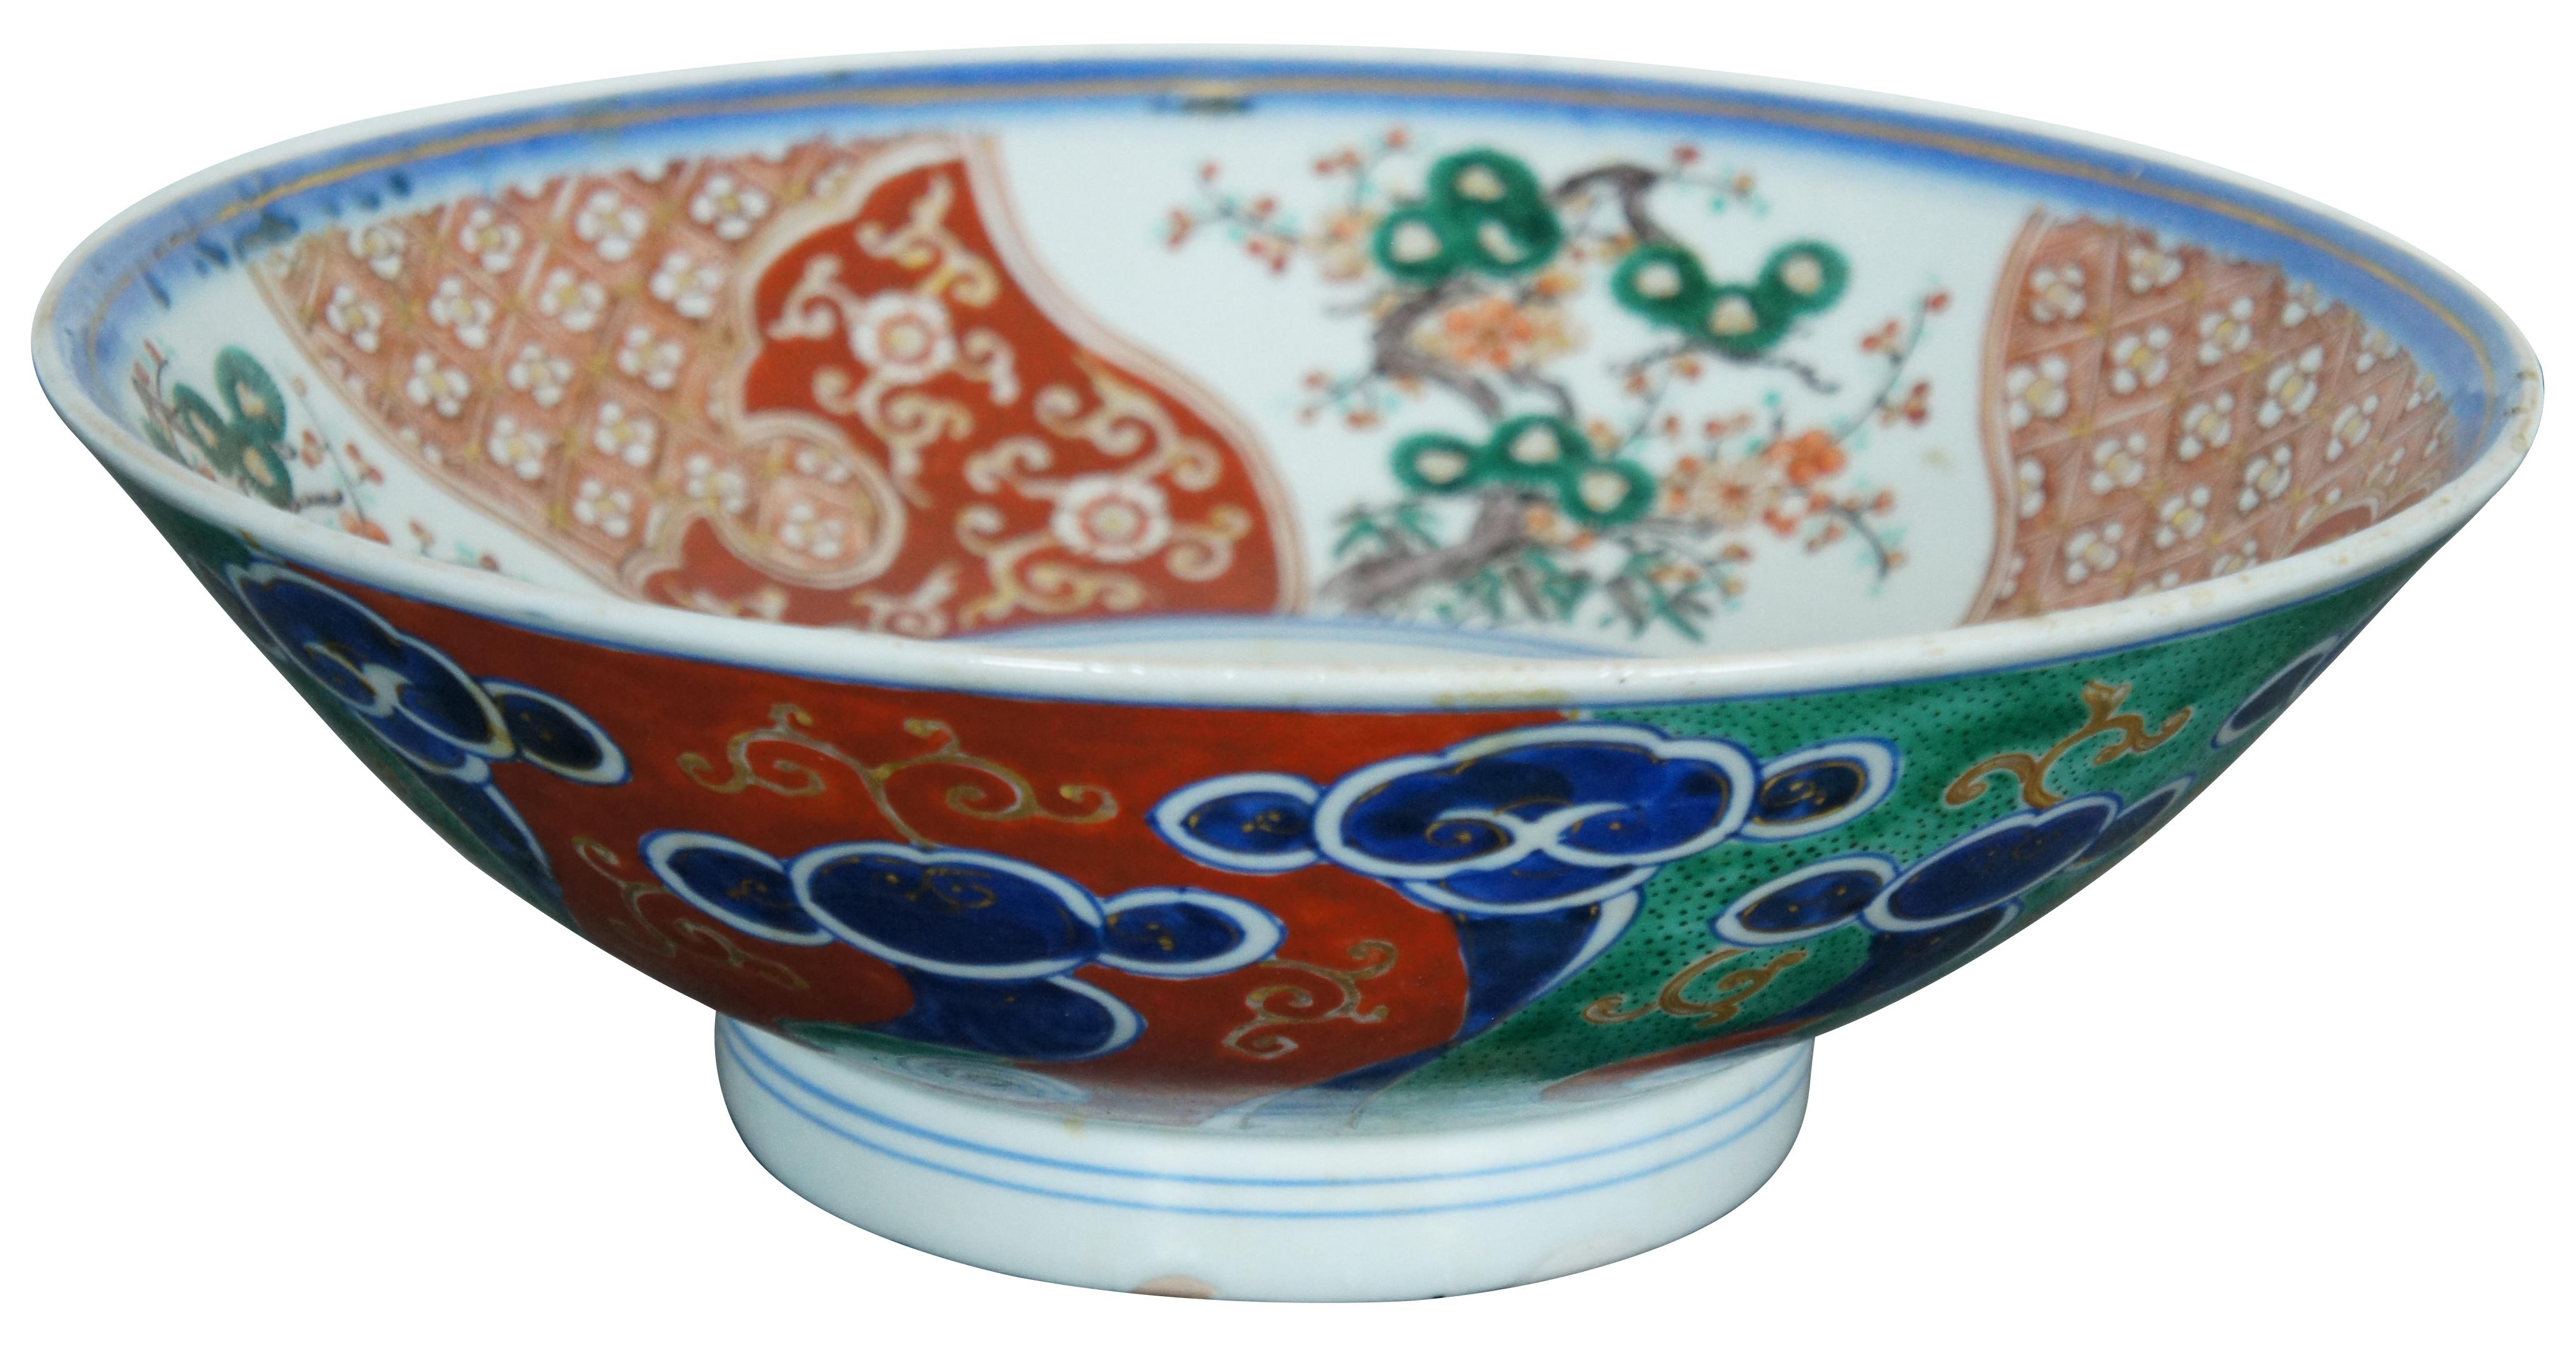 Antique Japanese Meiji period porcelain polychrome footed serving or centerpiece bowl, decorated with red and white florals, gnarled pines, and swirling clouds.